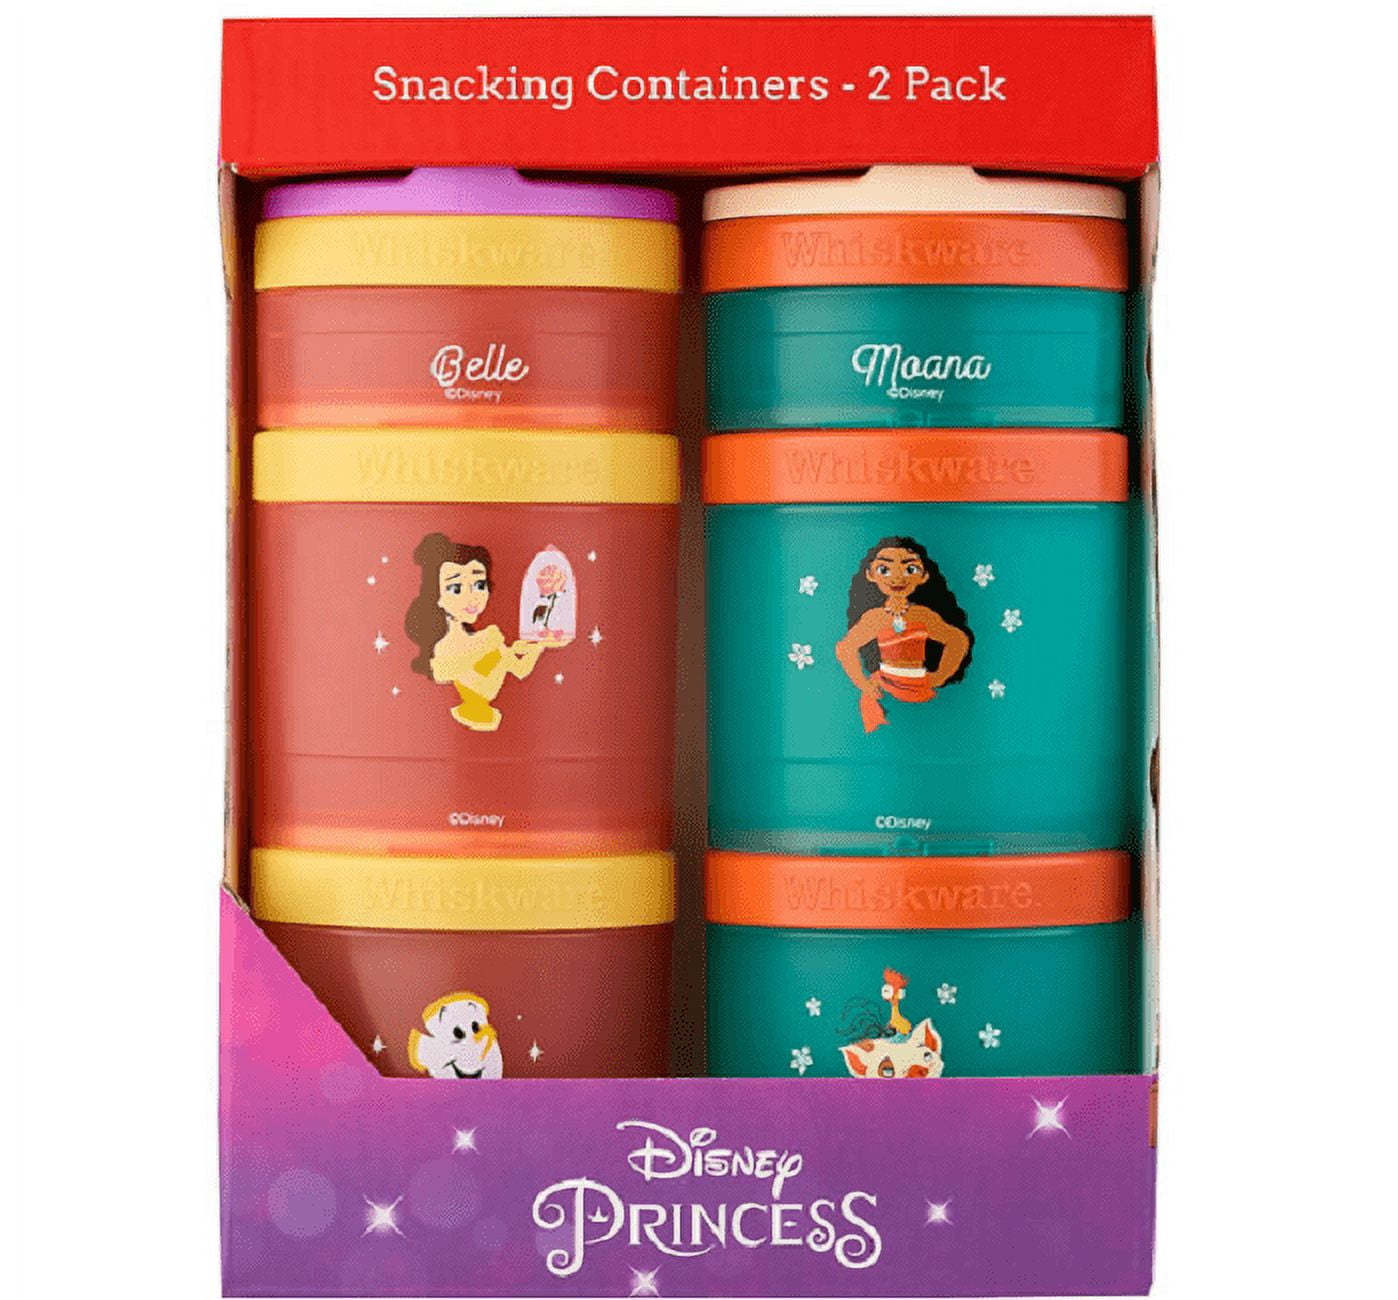  Whiskware Disney Princess Stackable Snack Containers